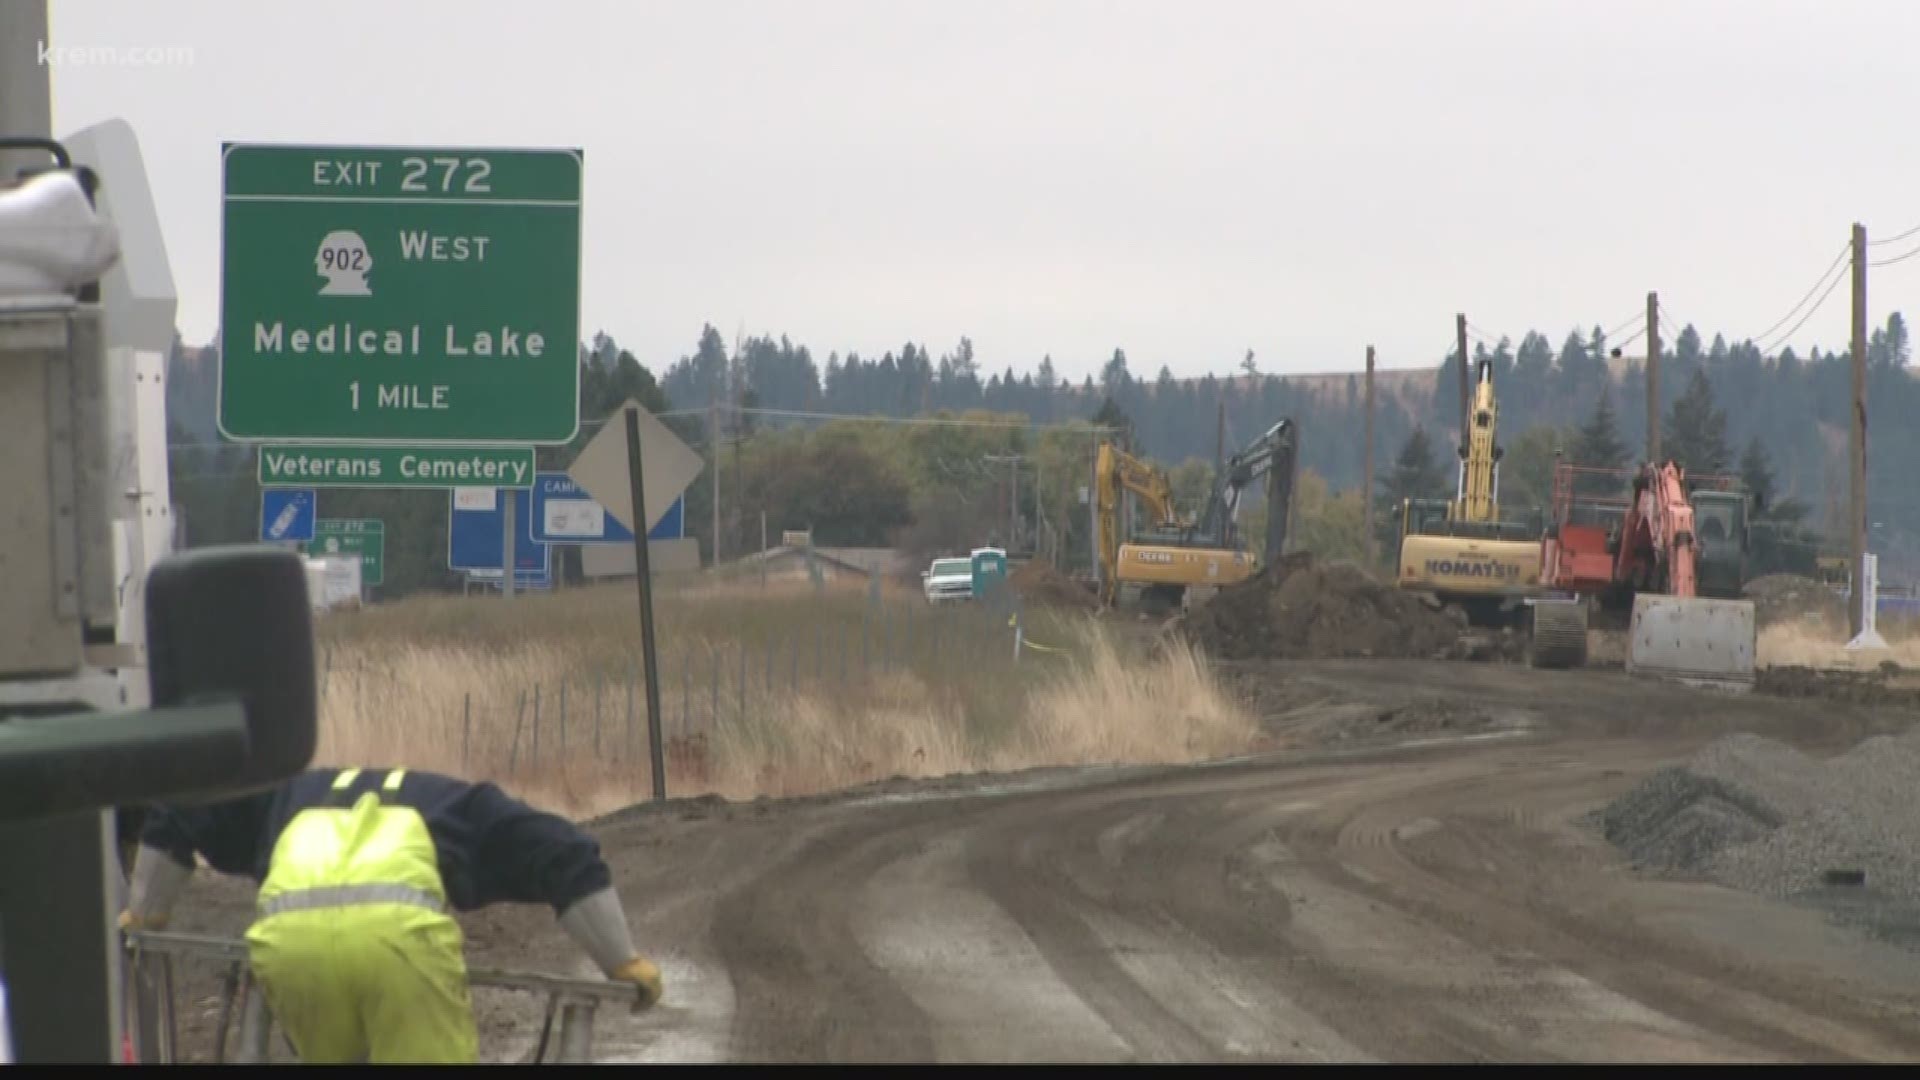 Spokane County leaders says the area off of Geiger Boulevard has a potential to attract new business and spur economic growth.